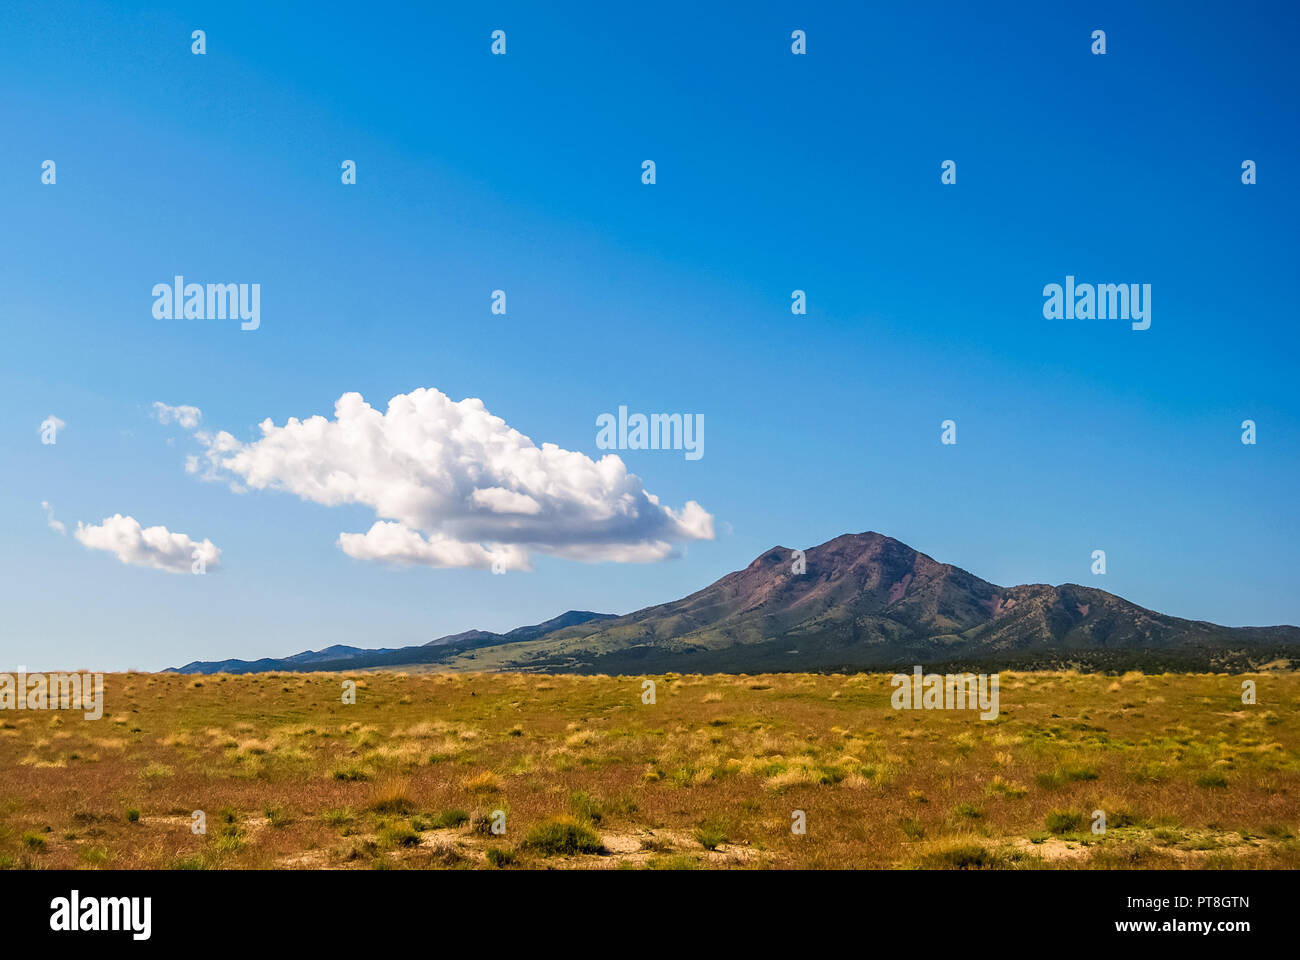 In the desert of western Utah, this small peak rises sharply from the vast fields of sage and grasses in the arid landscape. Above, a small cloud form Stock Photo